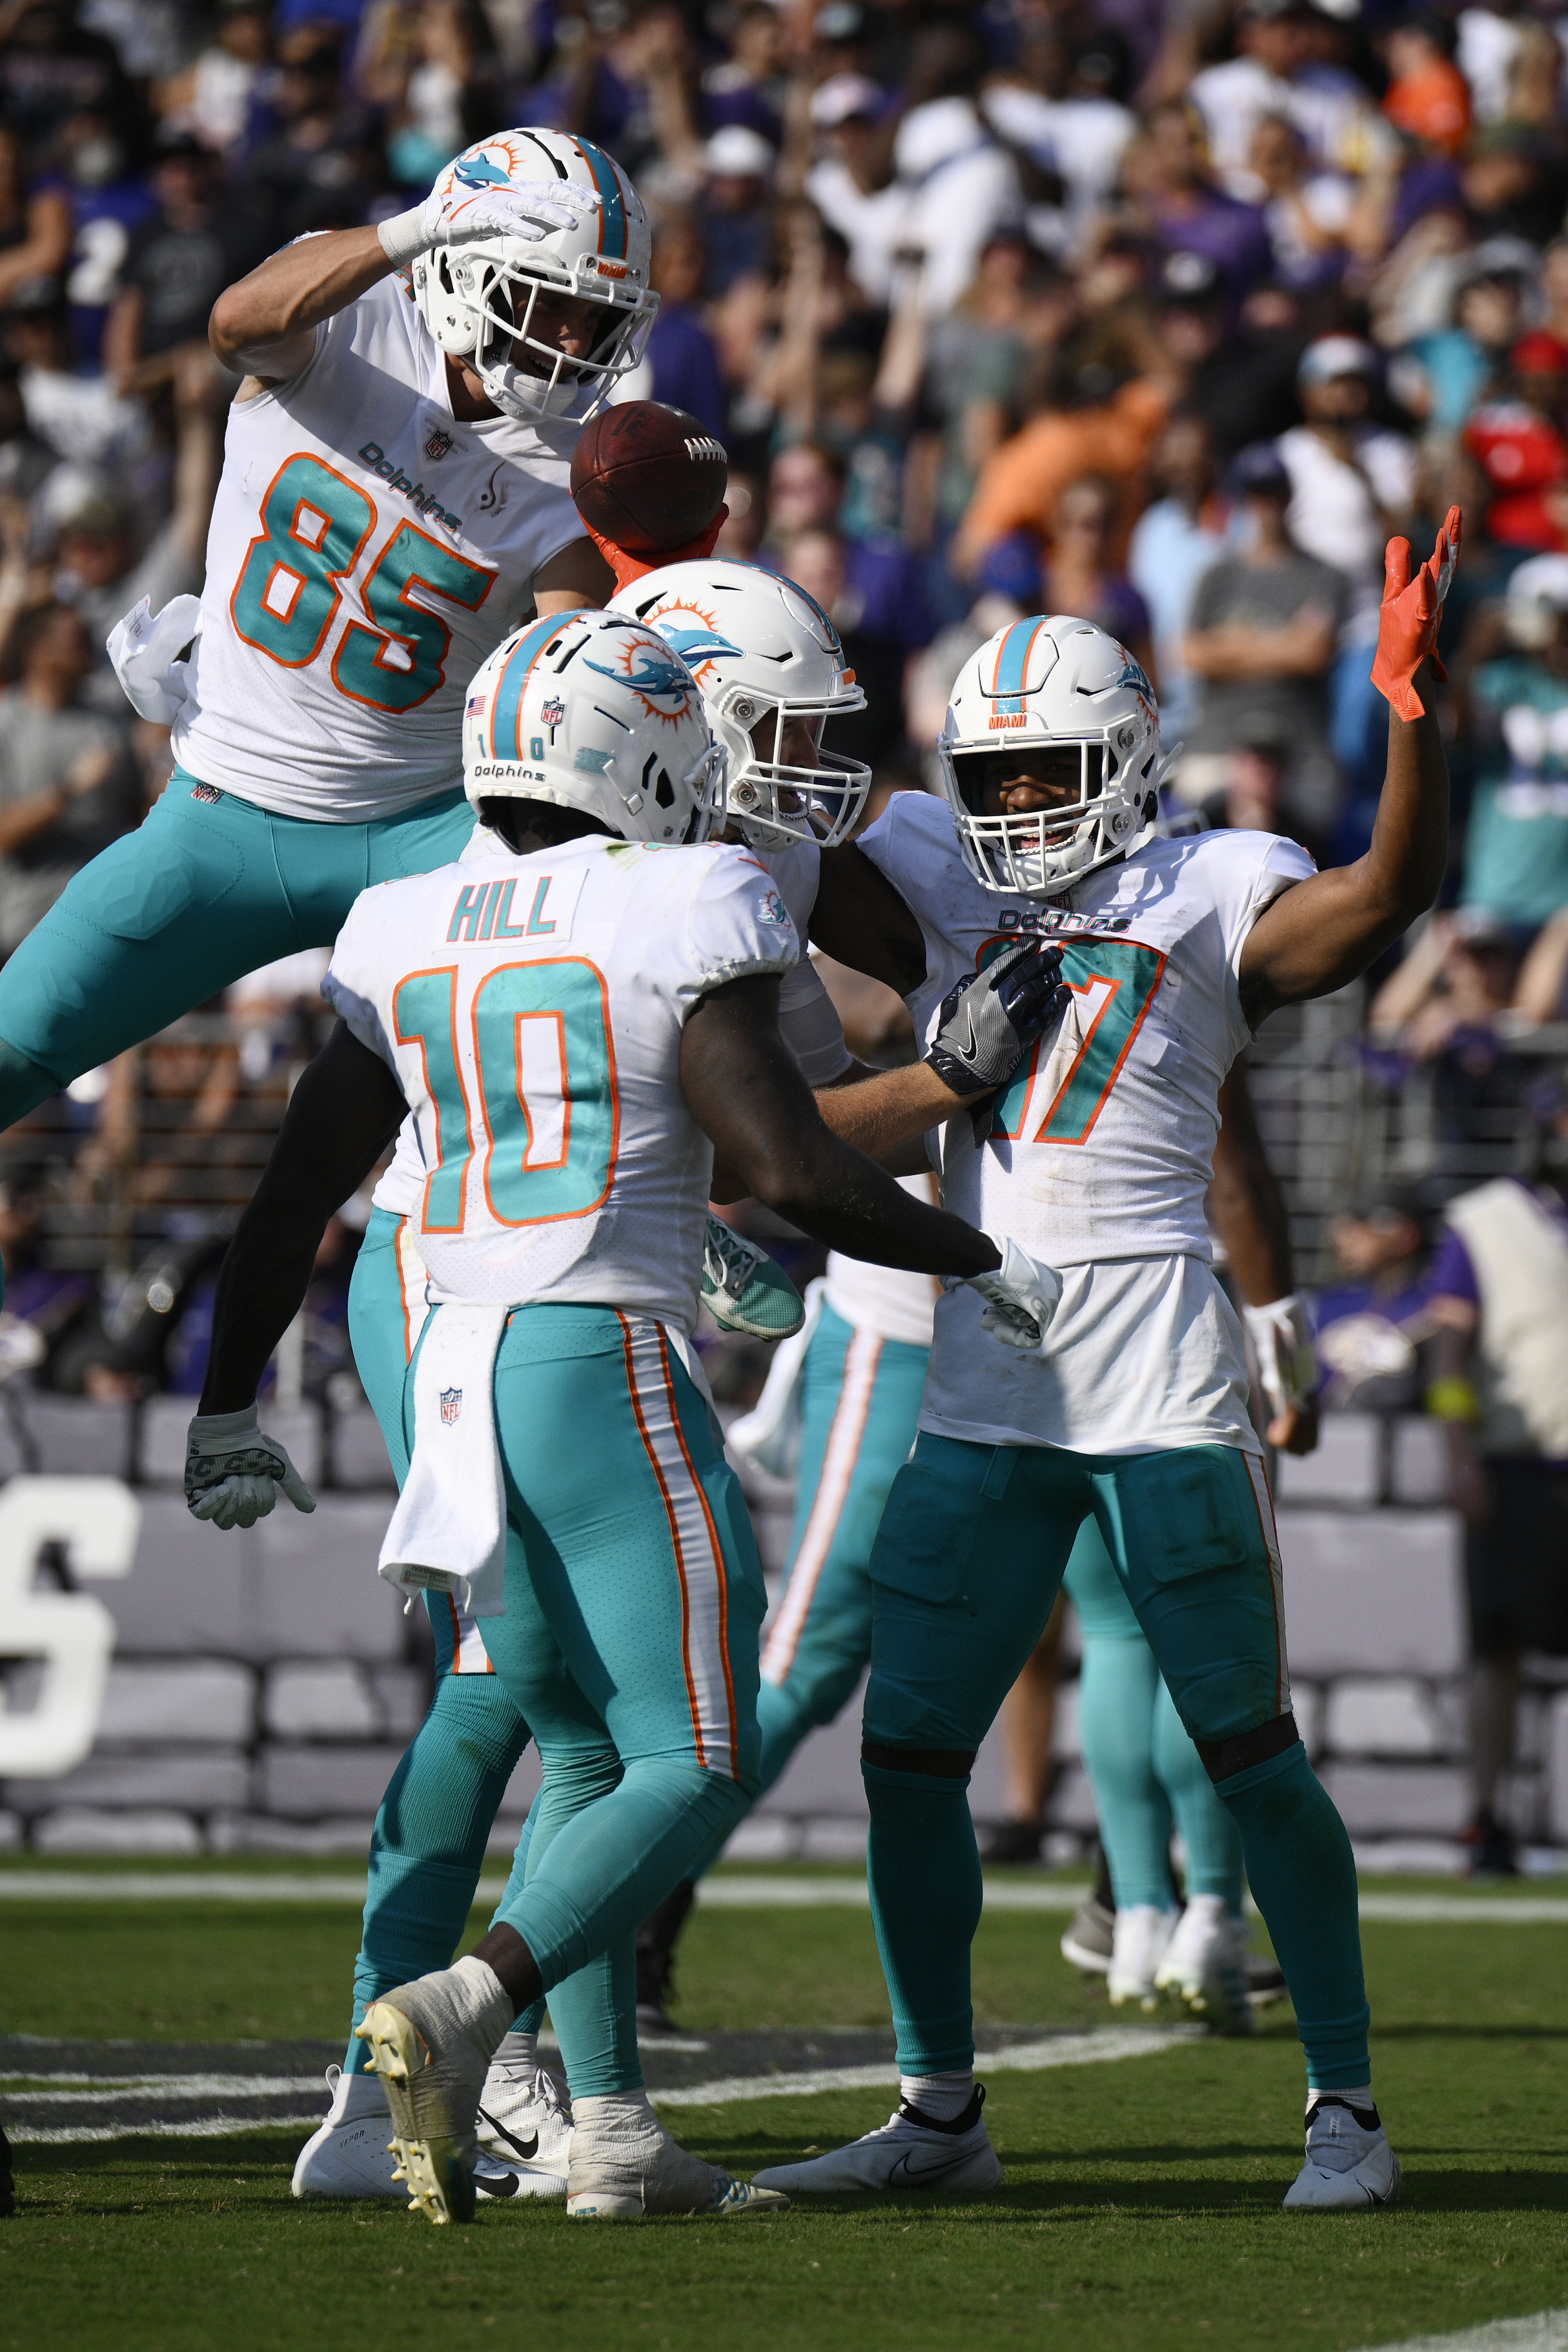 Tagovailoa throws 6 TD passes as Dolphins rally from 21 down to